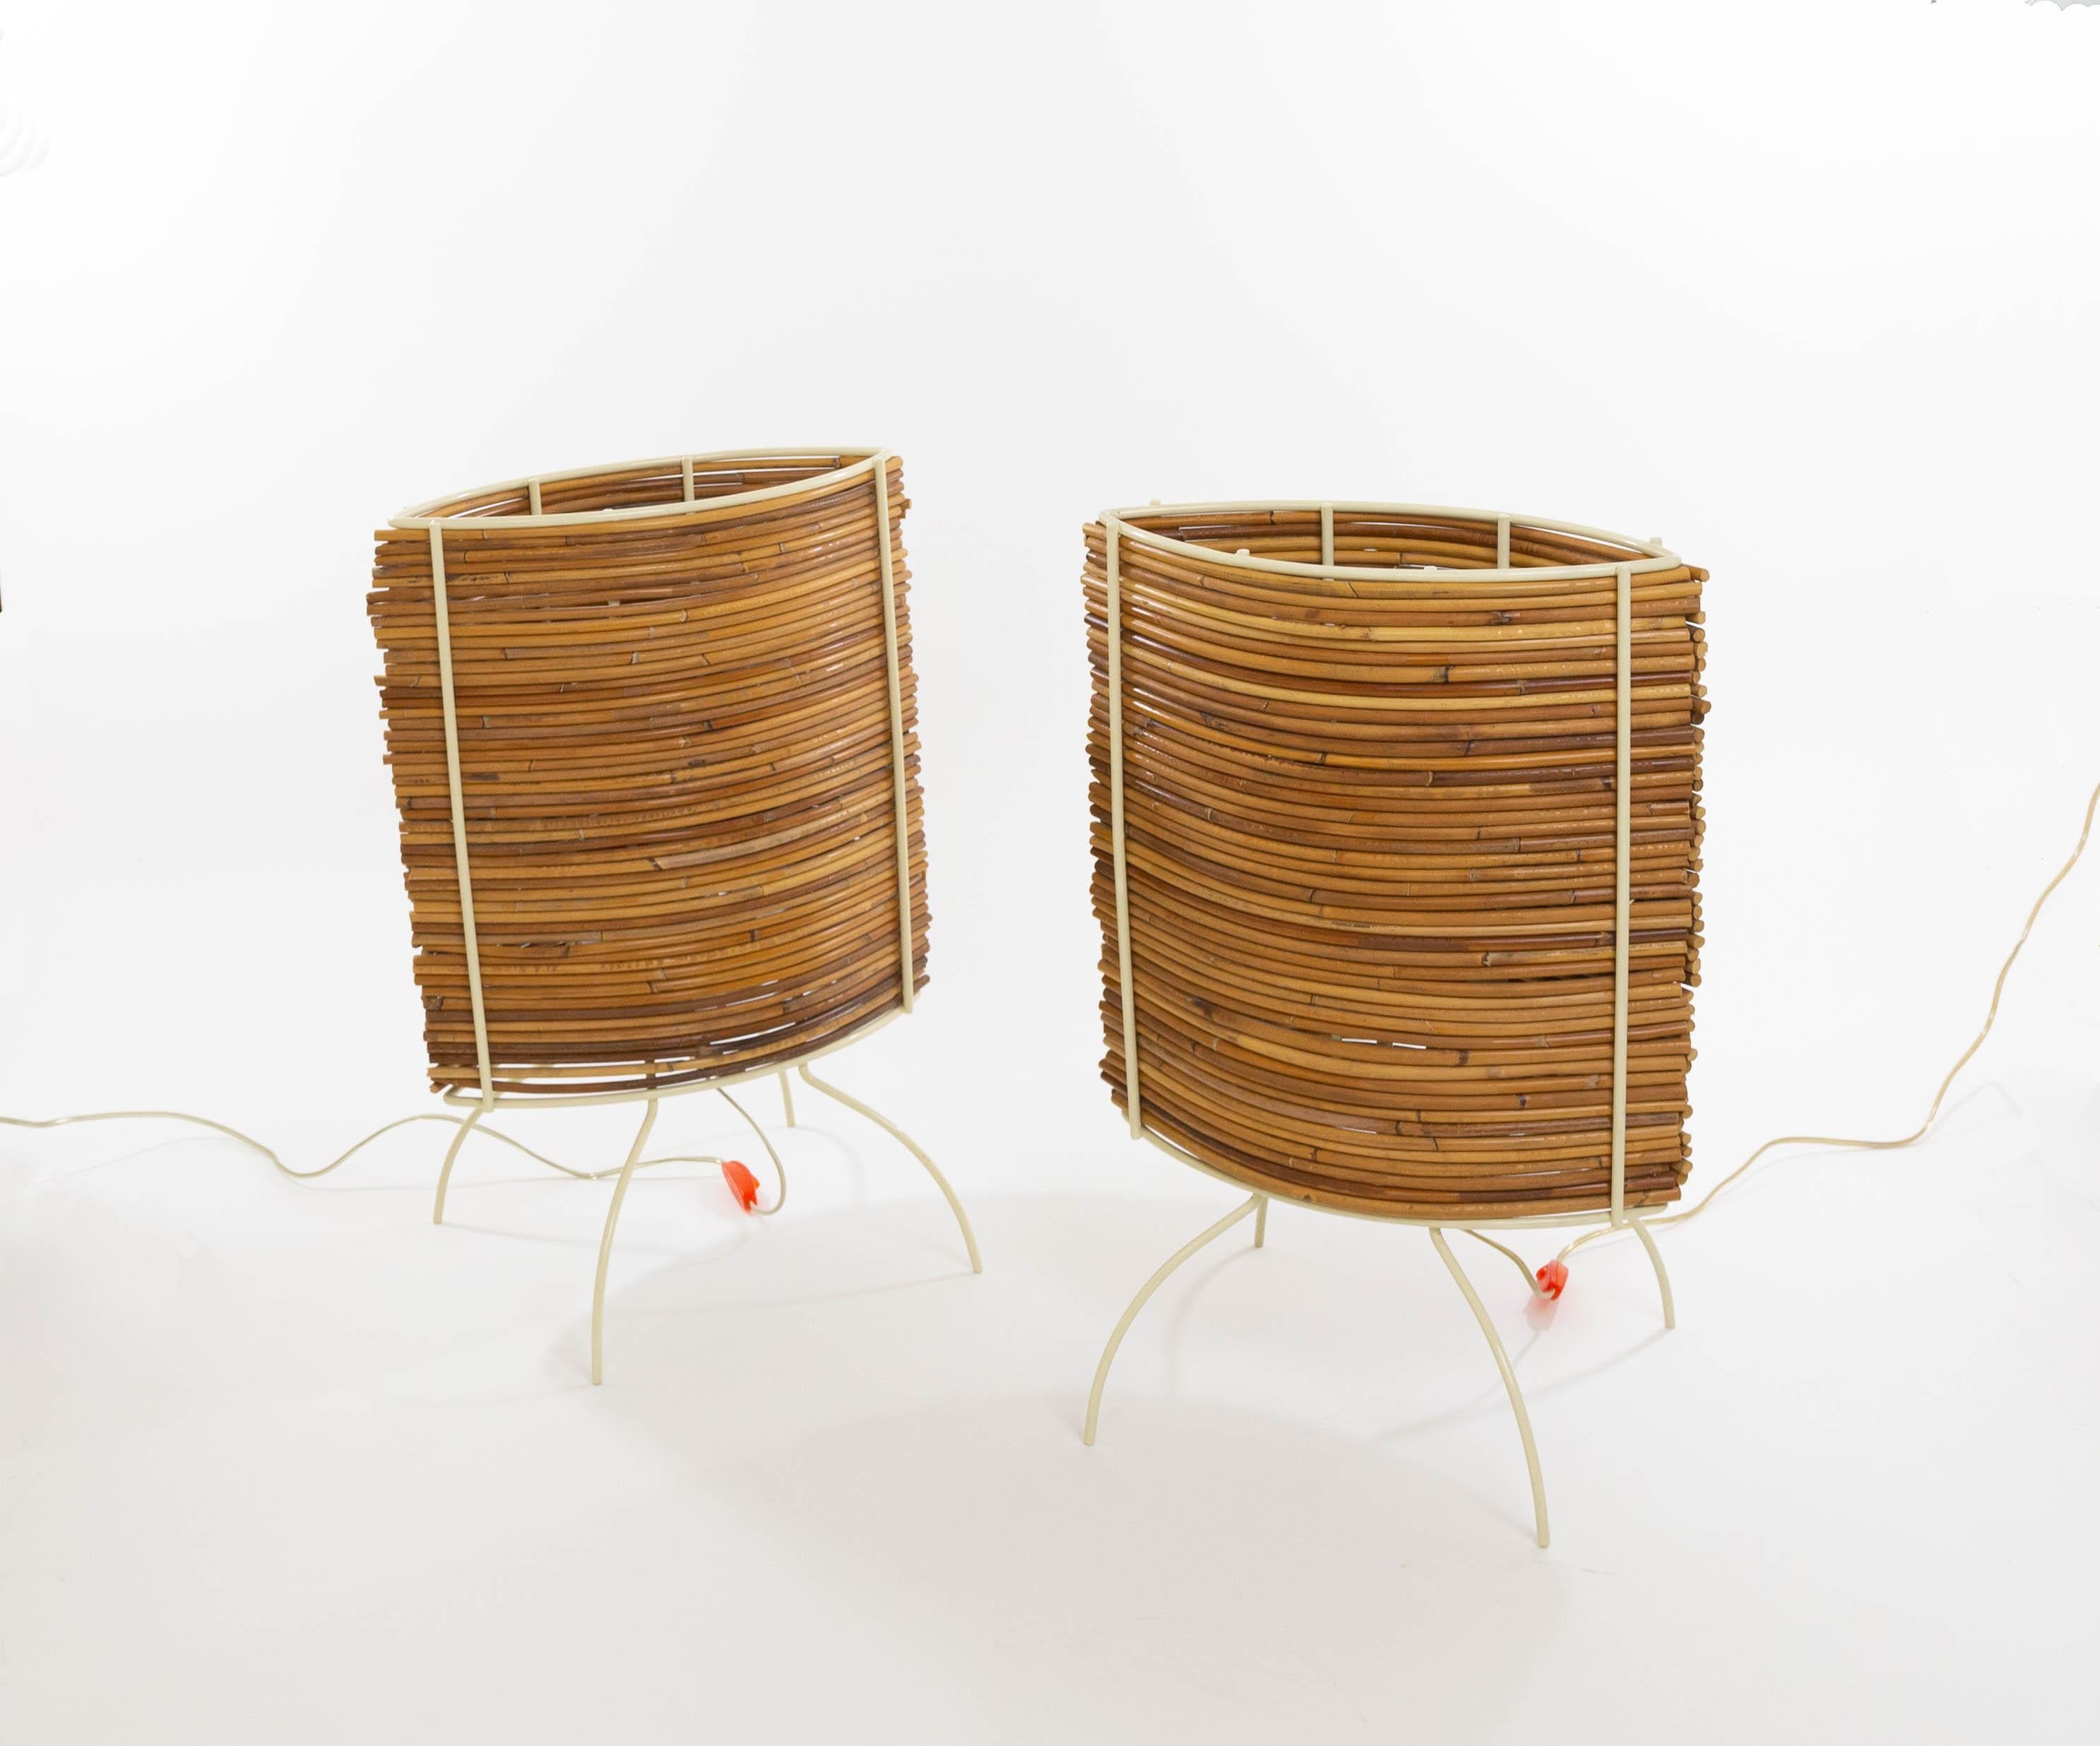 Large Bambù table lamps by Humberto & Fernando Campana for Candle, 2000s In Good Condition For Sale In Rotterdam, NL